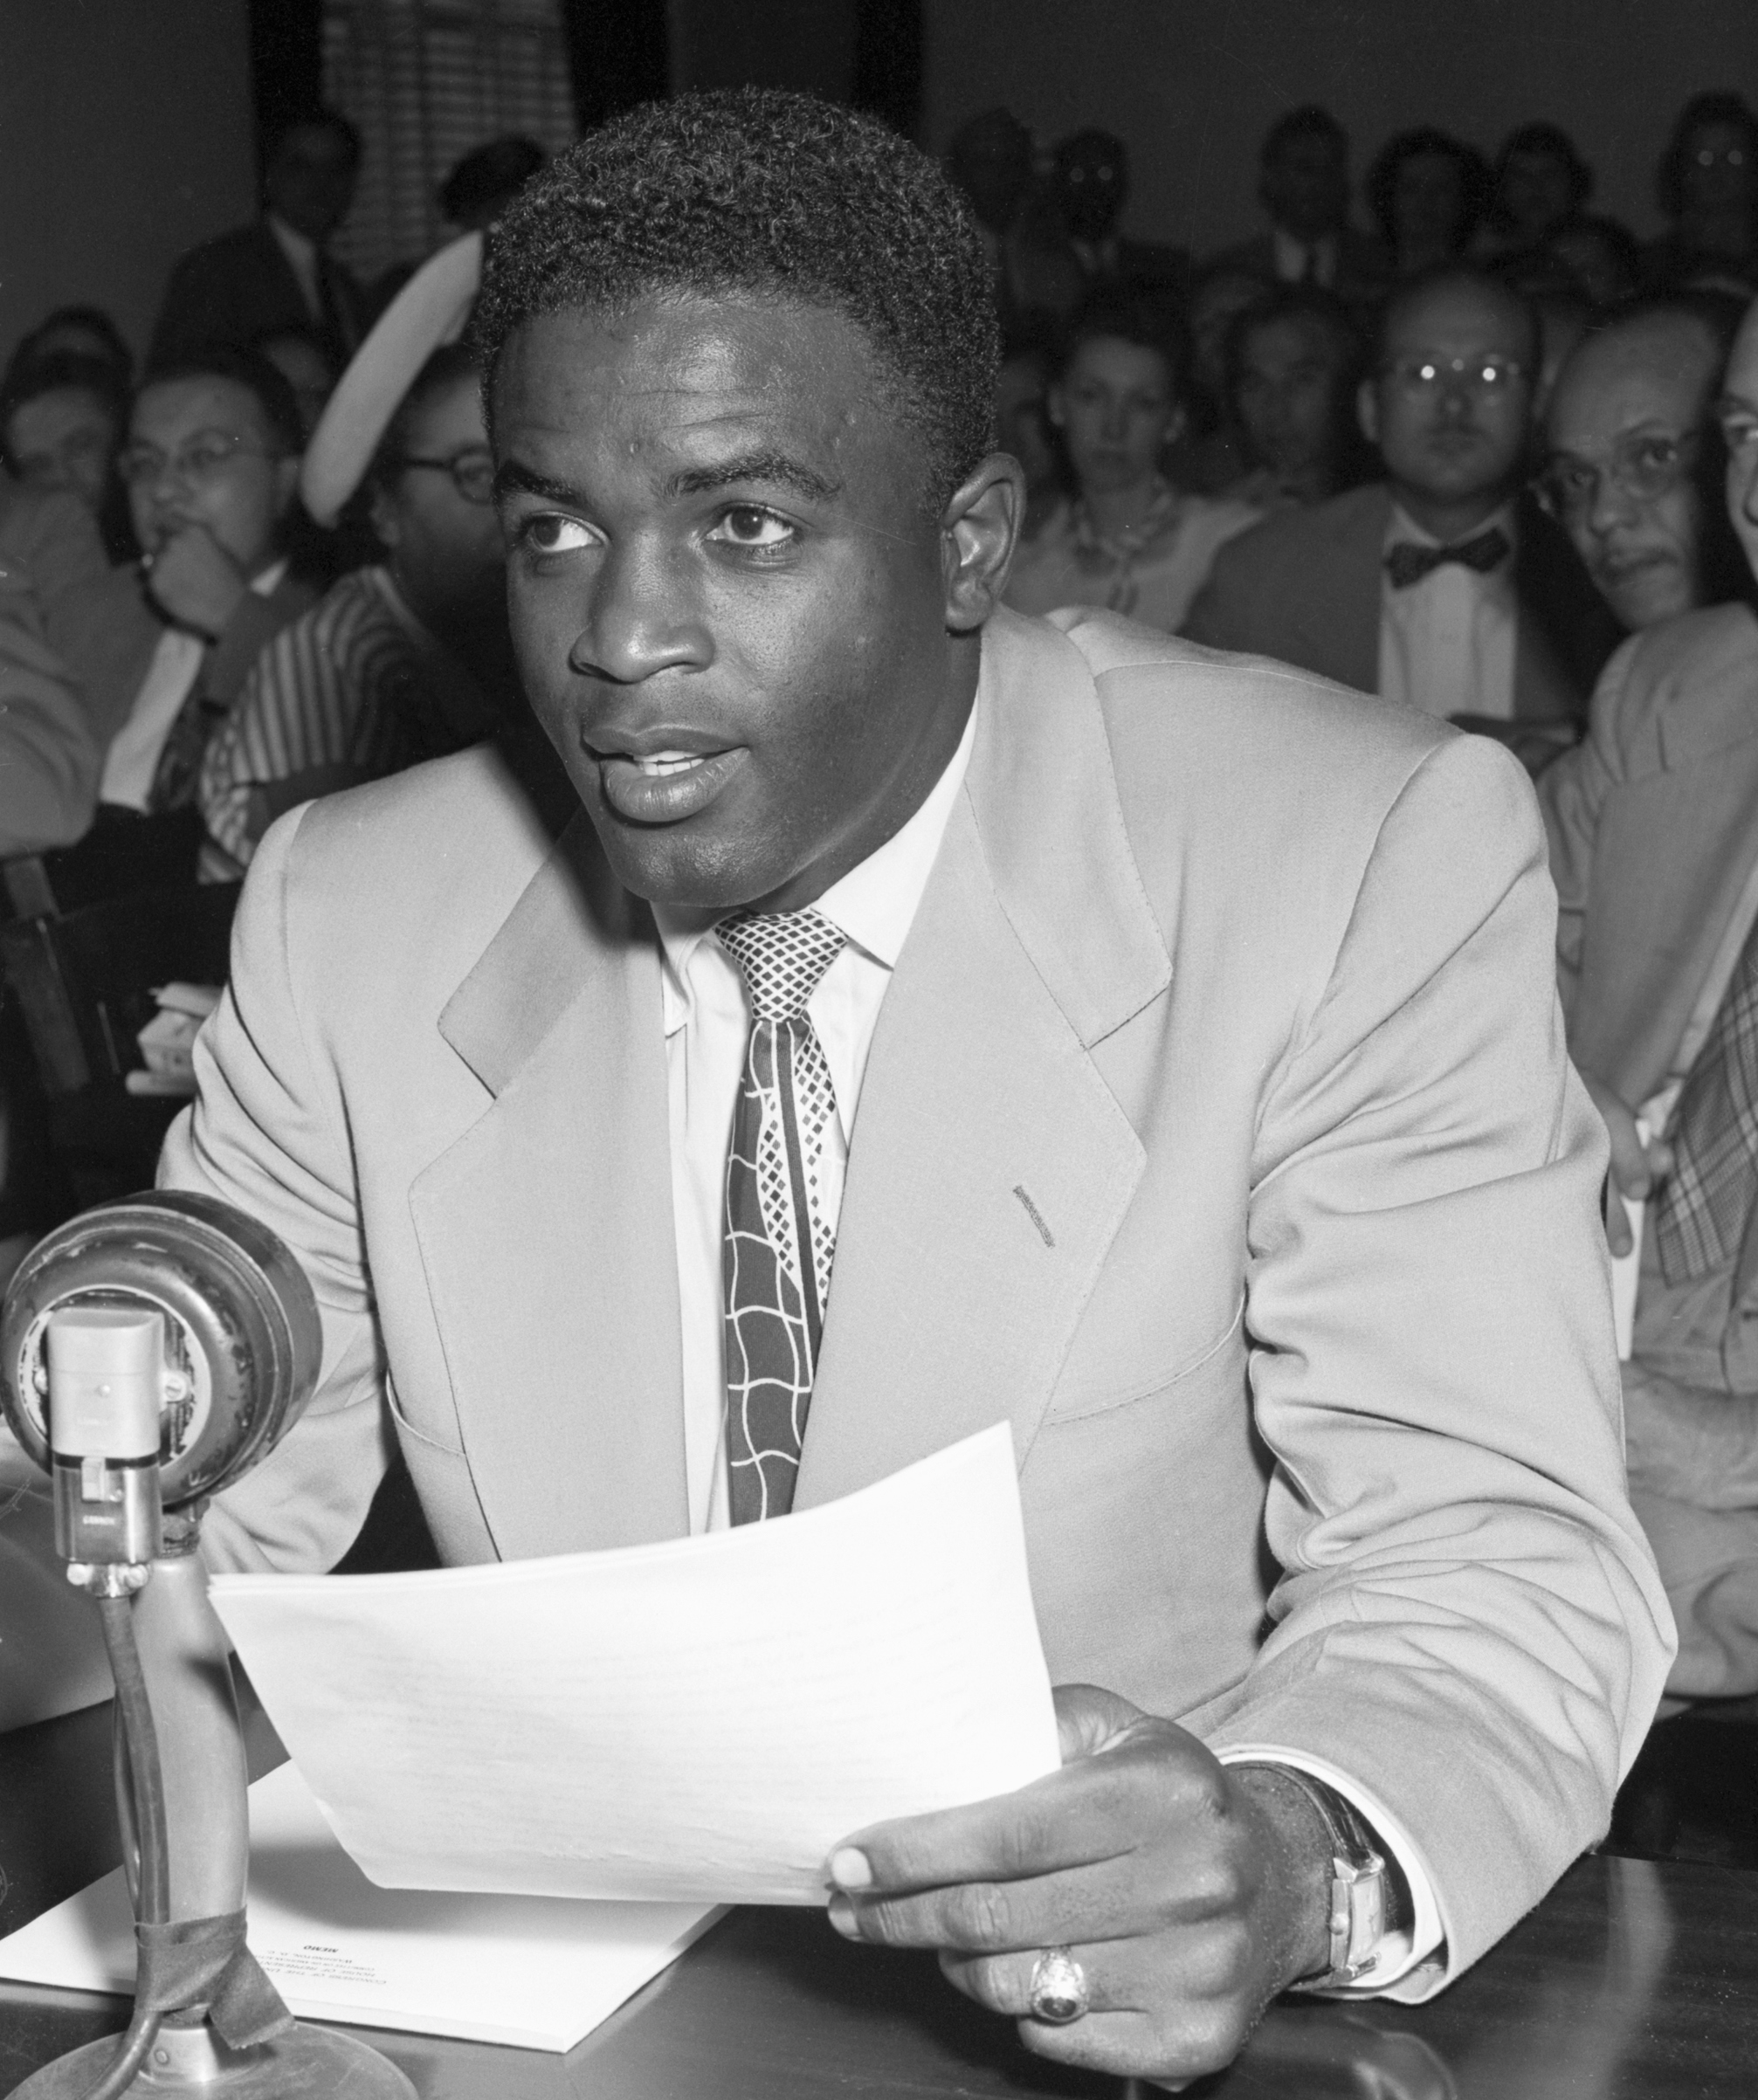 Jackie Robinson testifying before the House Un-American Activities Committee on July 18, 1949 (Bettmann Archive/Getty Images)